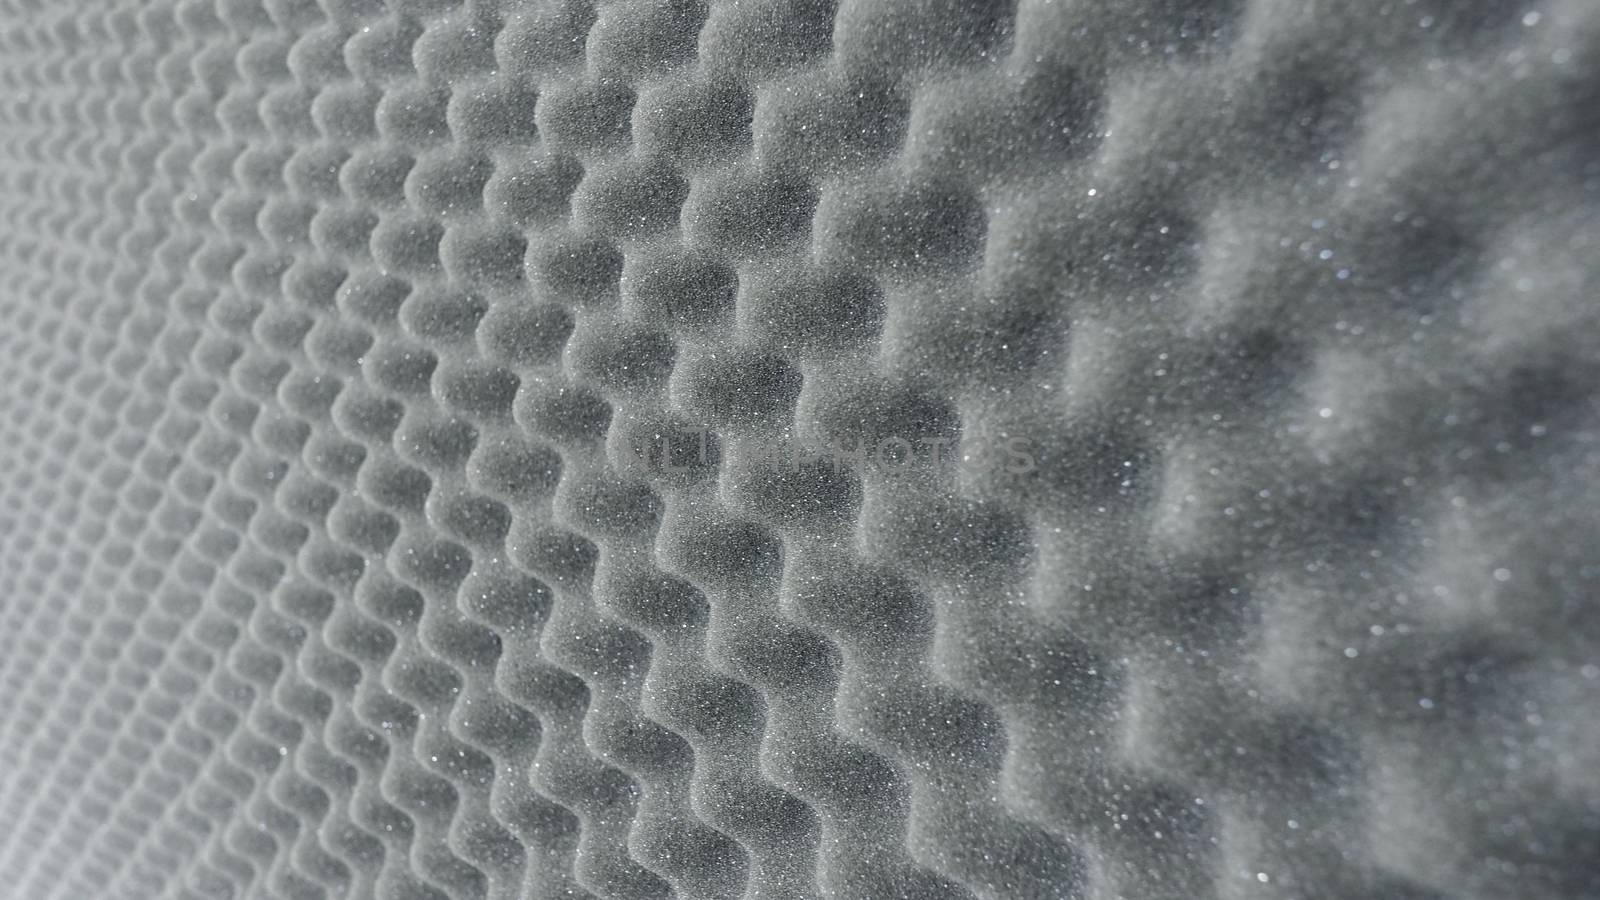 Sound proof acoustic foam on studio wall by gnepphoto